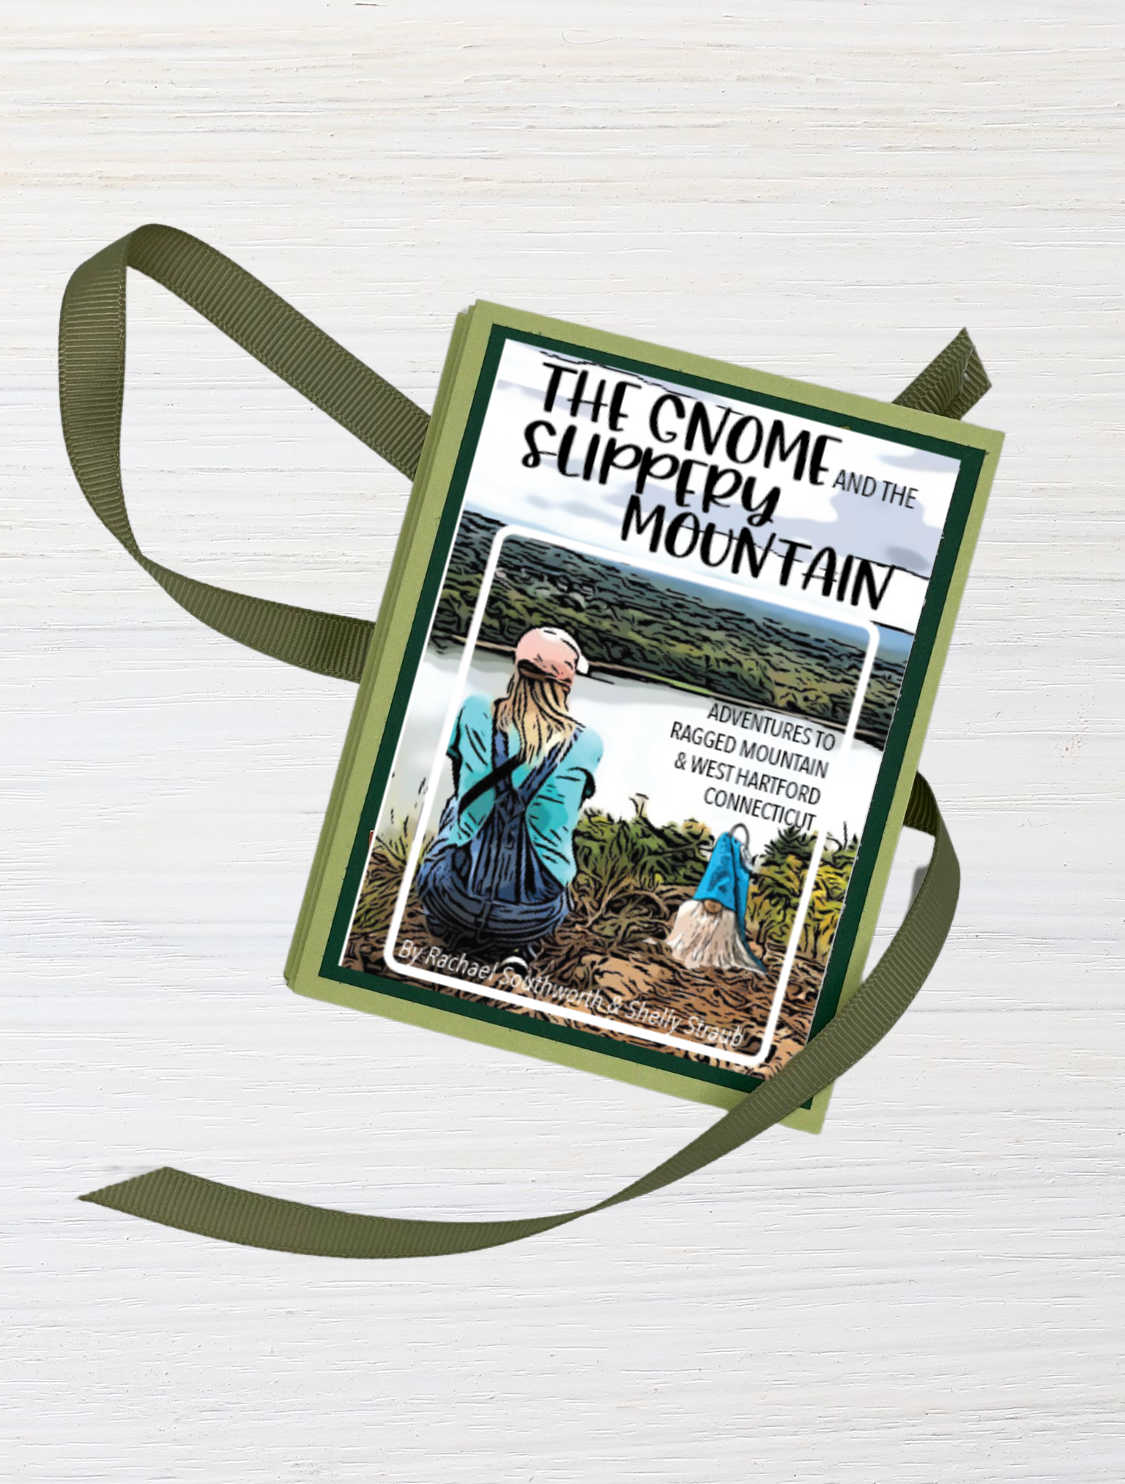 Printable Mini Story Book - The Gnome and the Slippery Mountain - Children's Story Book Project